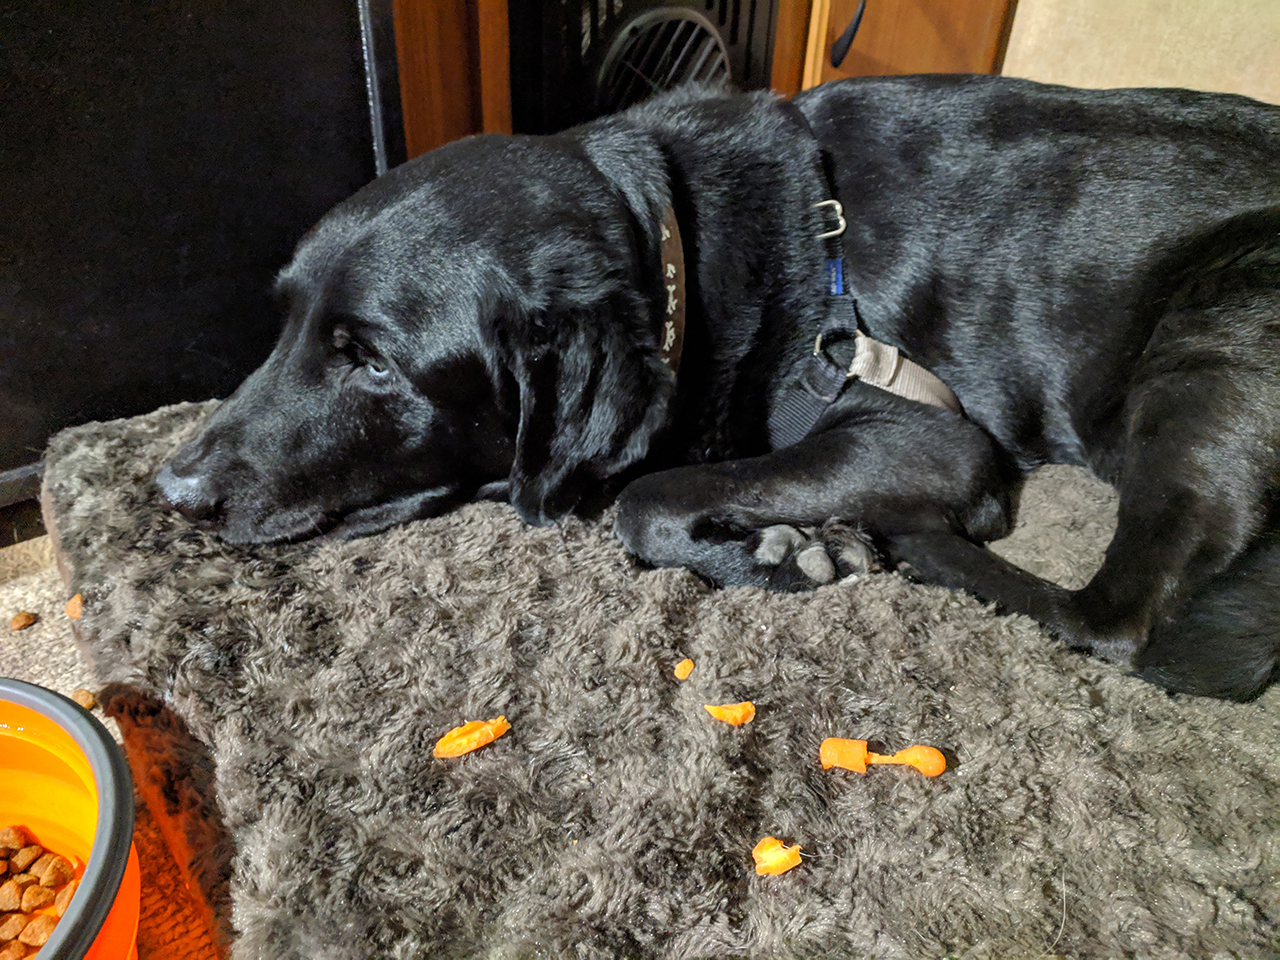 H-dog laying next to a chewed up (but uneaten) carrot